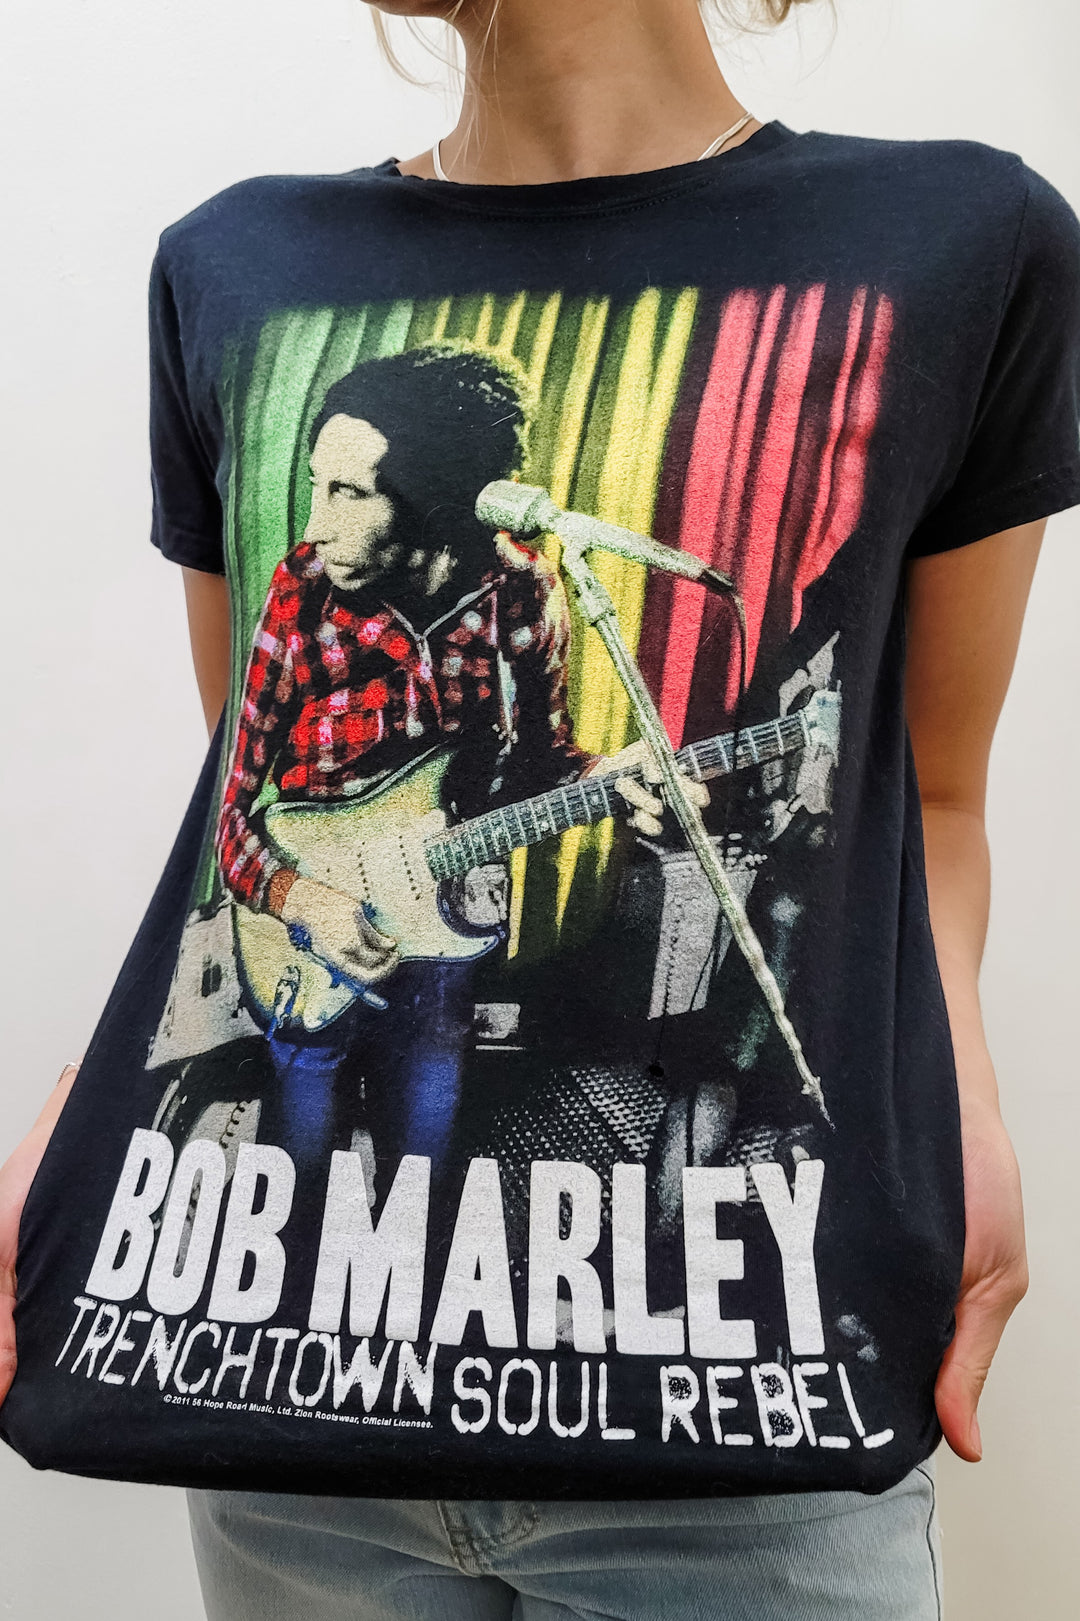 Bob Marley Trench Town Soul Rebel Black Vintage Graphic Tee